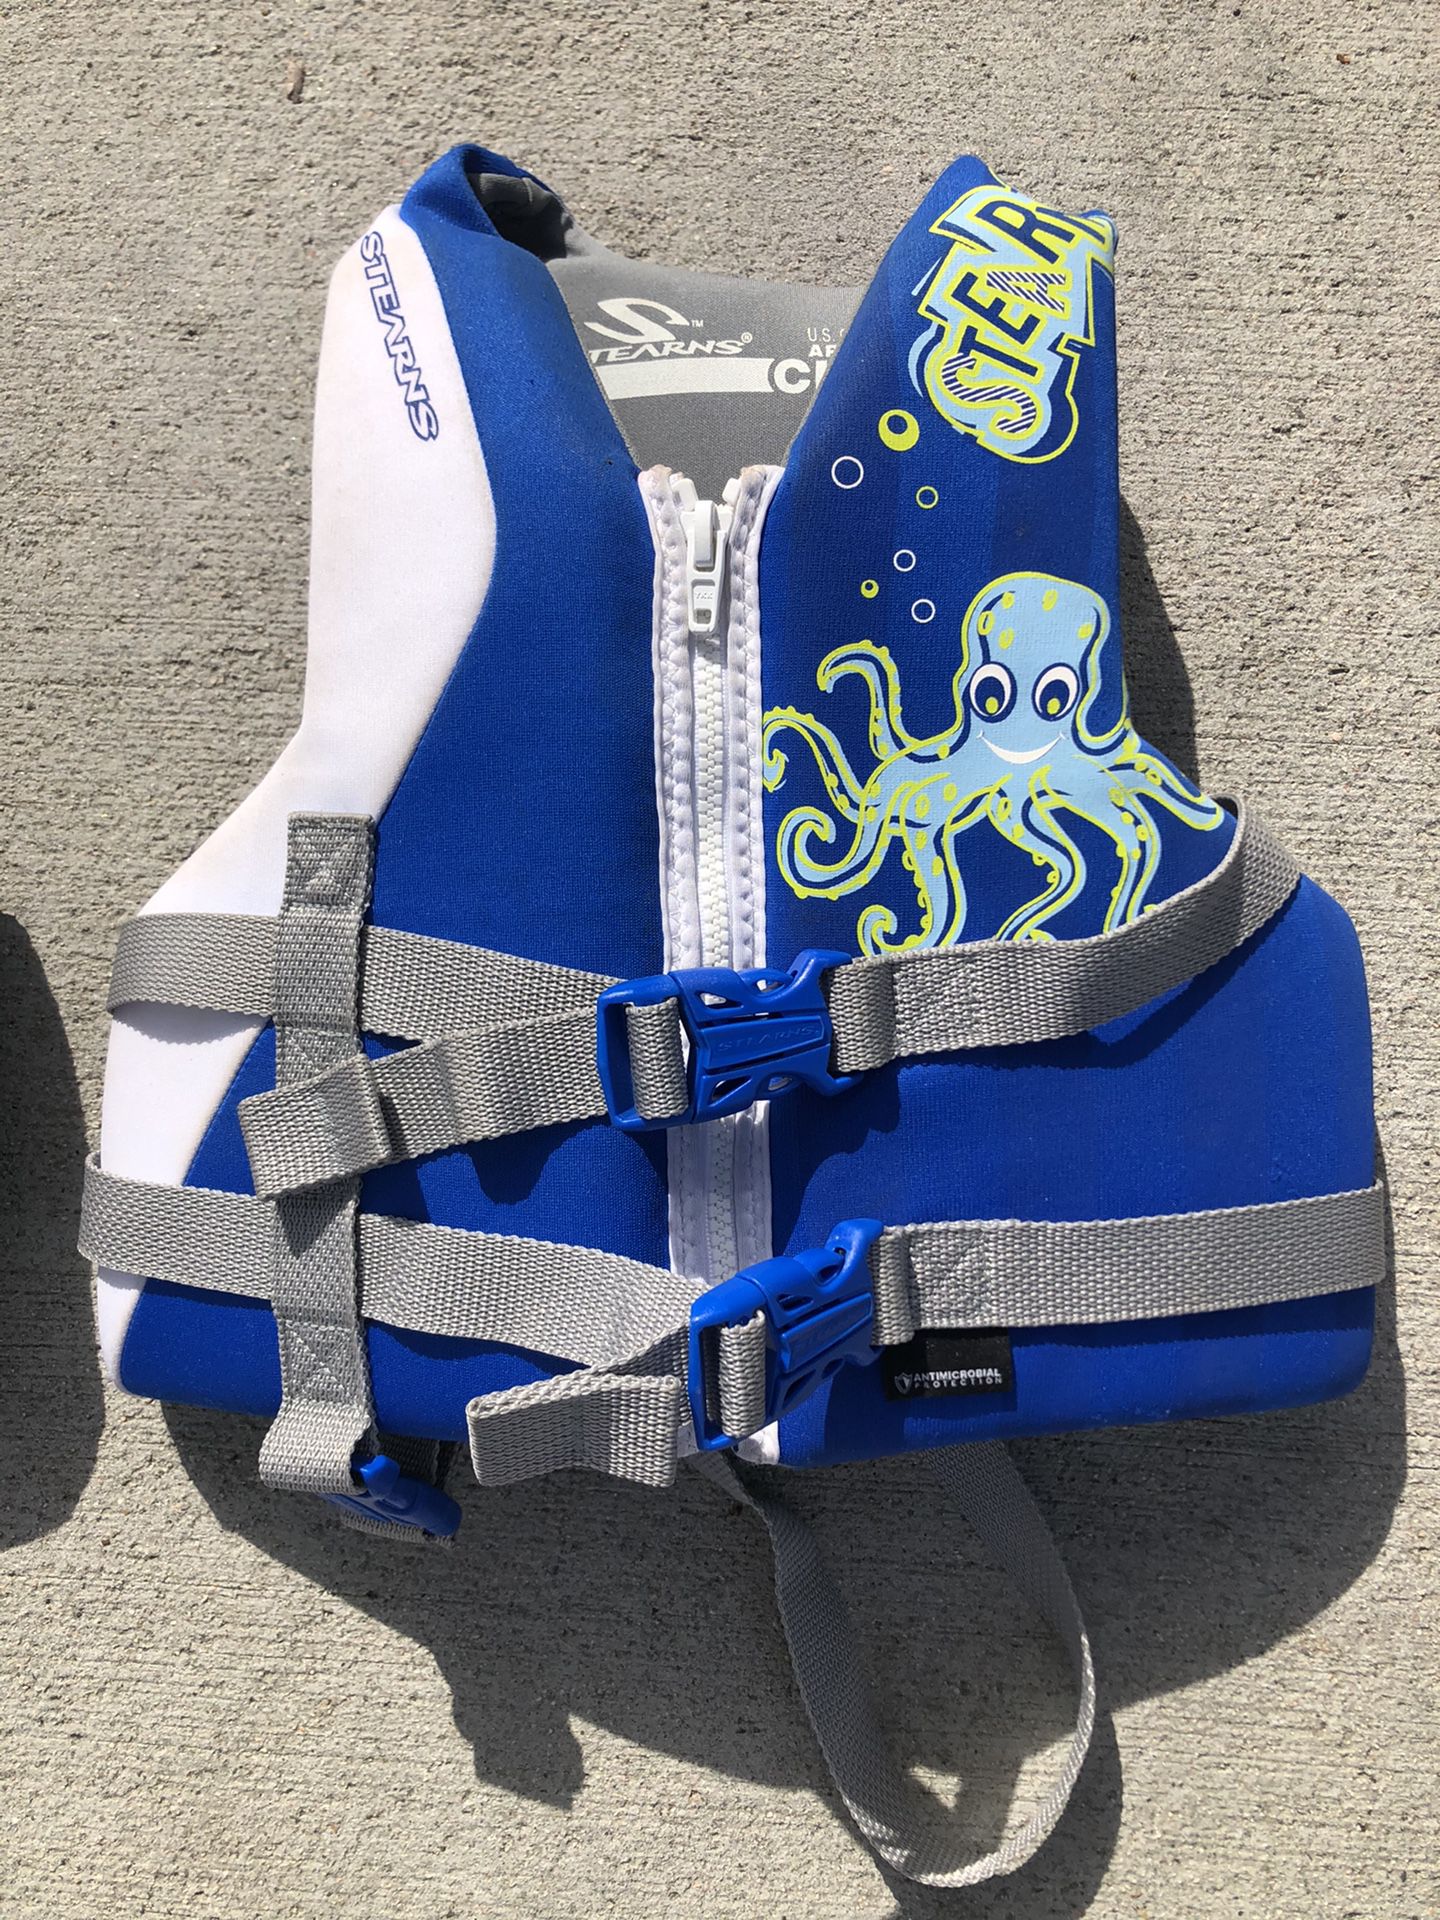 Life jackets for Kids